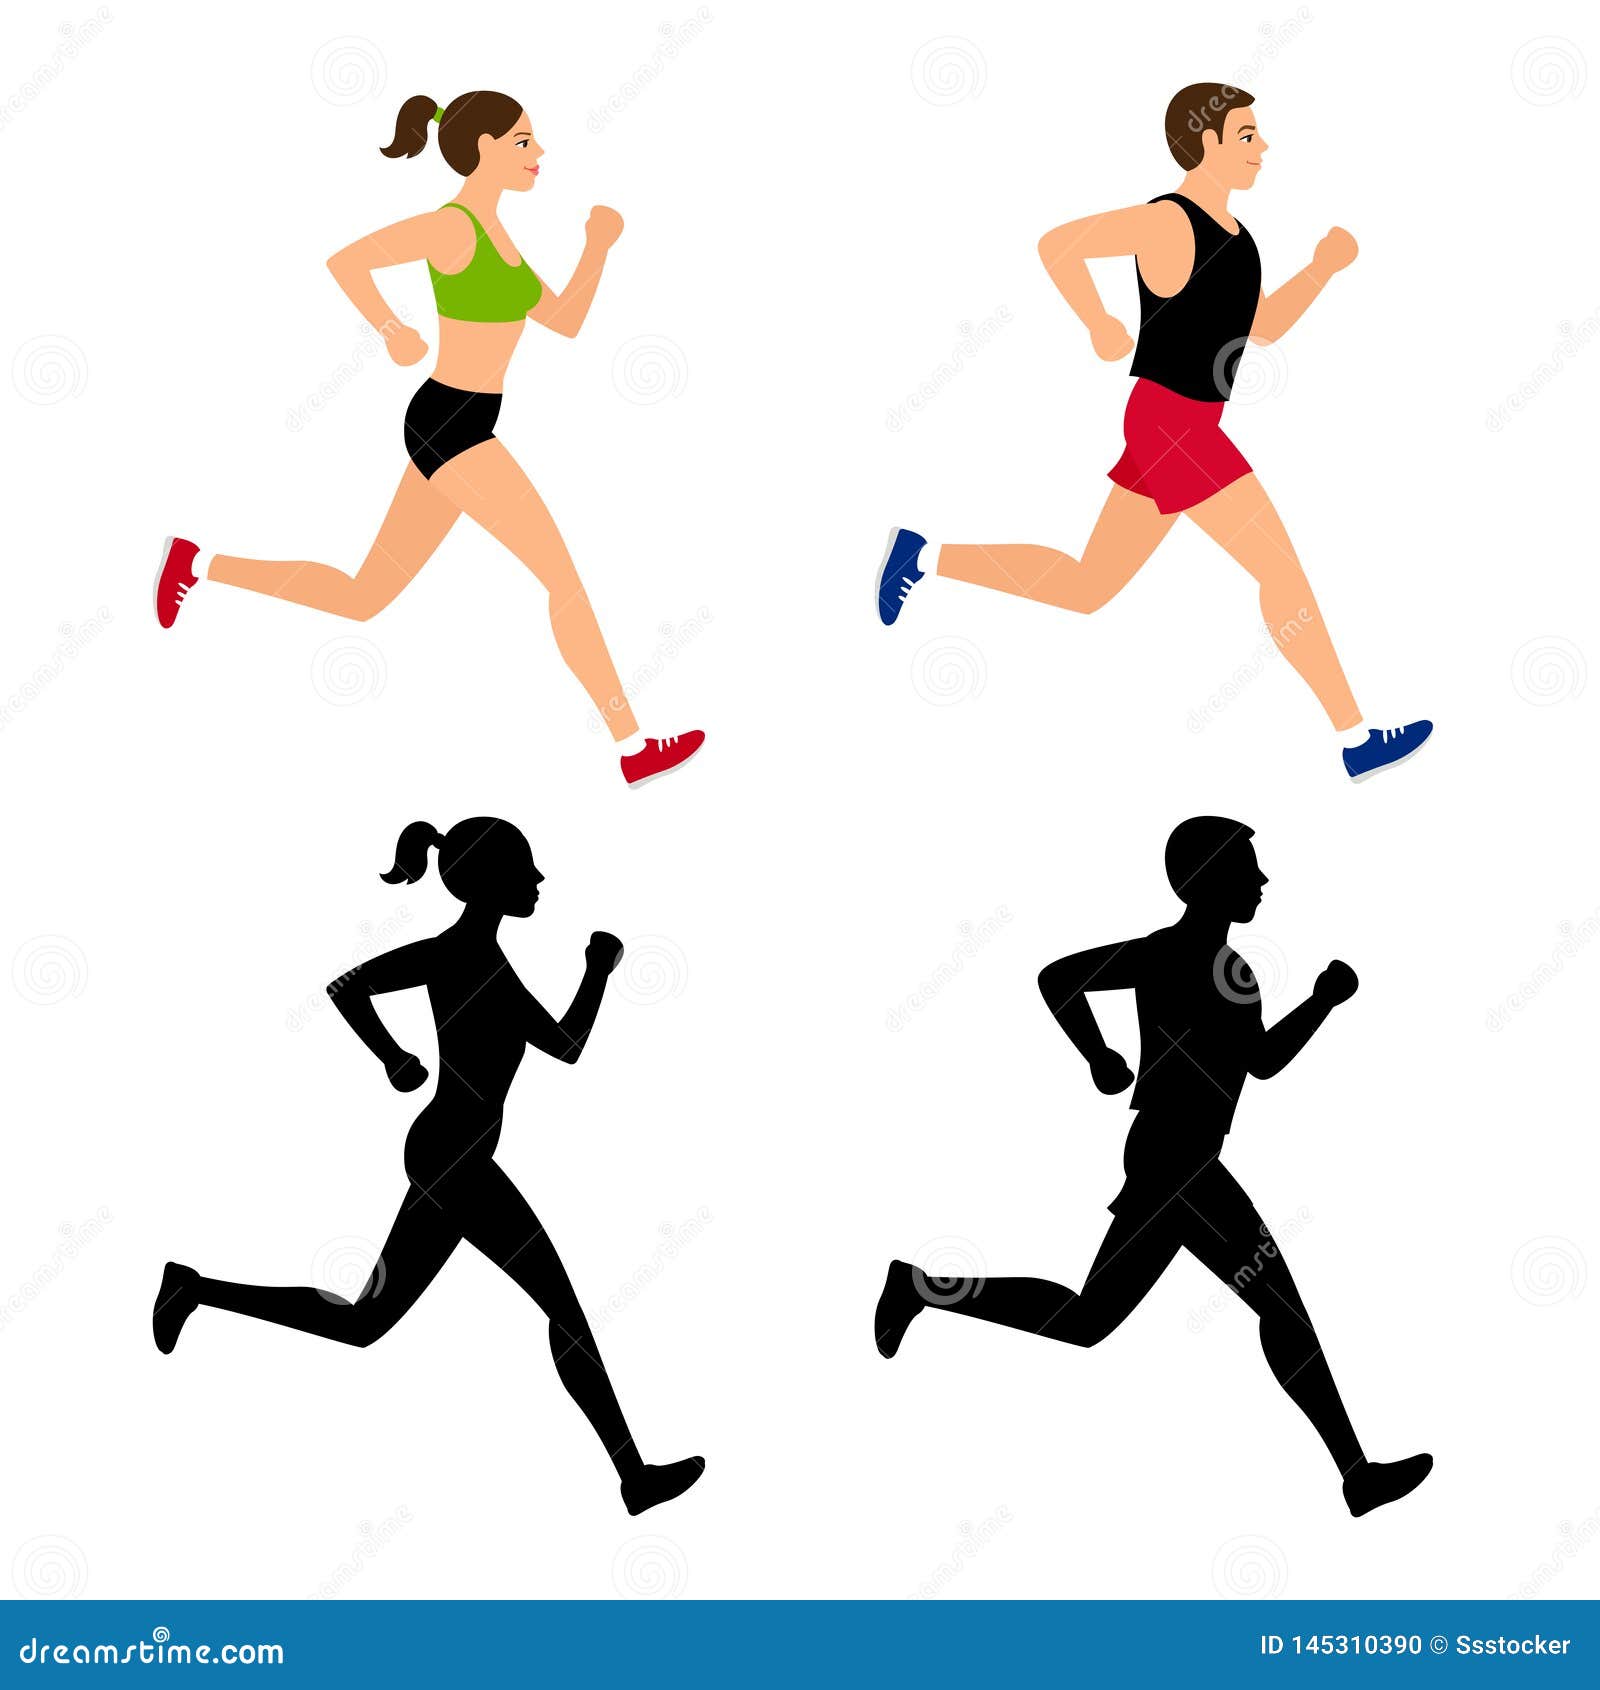 Cartoon Character Running People Stock Vector - Illustration of body, male:  145310390